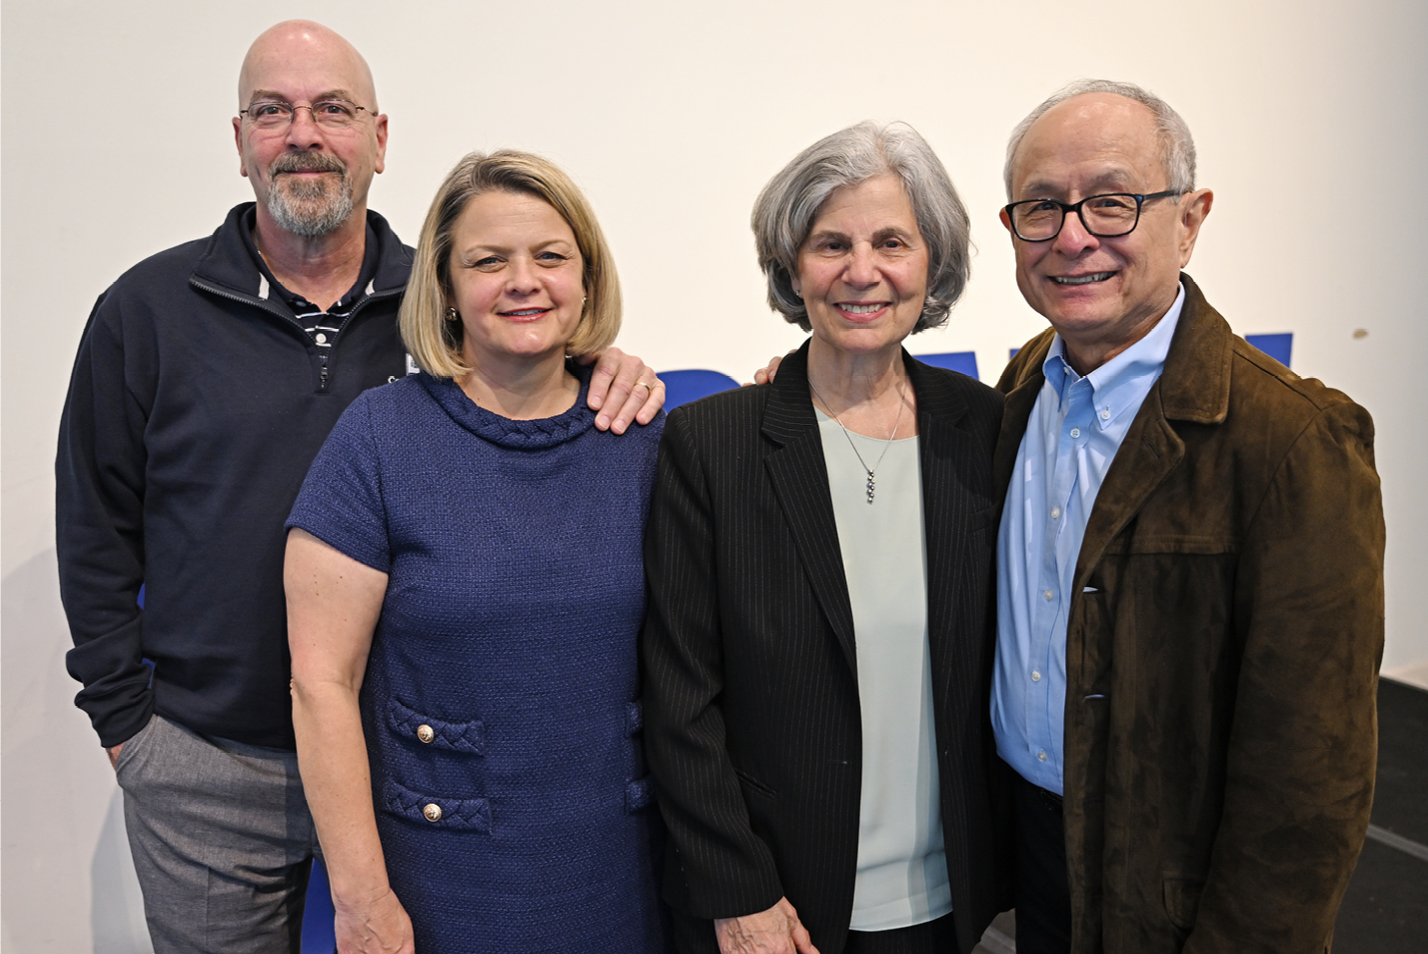 David Tetreault, President-elect Andrea Chapdelaine, Phyllis Michael Wong and Interim President Les Wong pose for a group portrait.